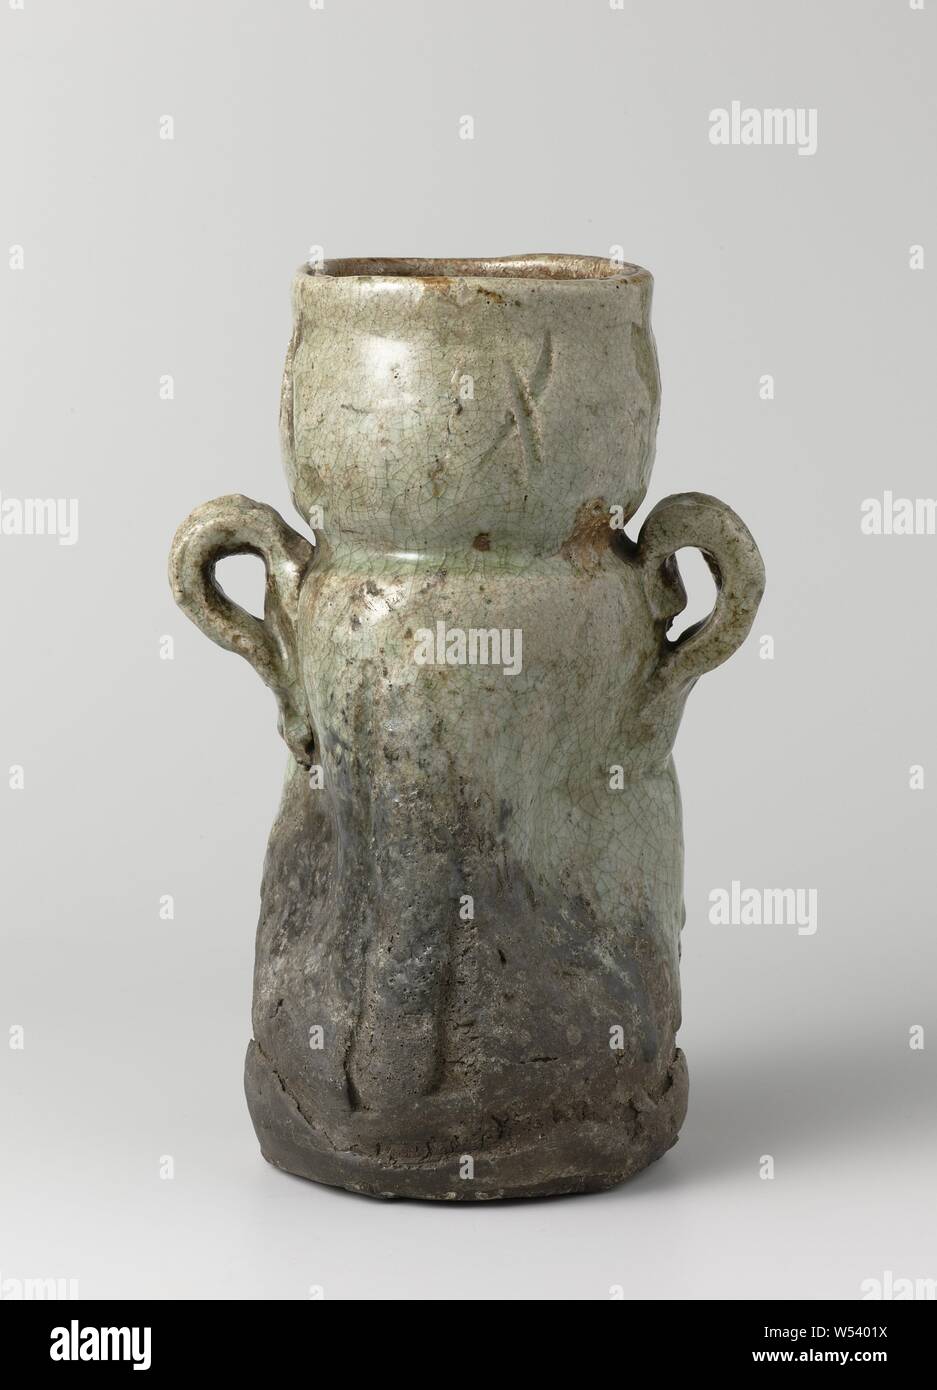 Vase with a green glaze and two handles, Vase of stoneware with two ears on the shoulder, partially covered with a celadon green glaze. The abdomen is dented and four times an engraved cross on the neck. The lower part of the vase is unglazed. Old trader's label on the bottom with 'N.V. Hammer - Far Eastern Art New York / 440 '. I go., anonymous, Japan, c. 1600 - c. 1699, Edo-period (1600-1868), stoneware, glaze, vitrification, h 26.7 cm d 10.5 cm d 14.1 cm d 11.8 cm l 17.5 cm Stock Photo